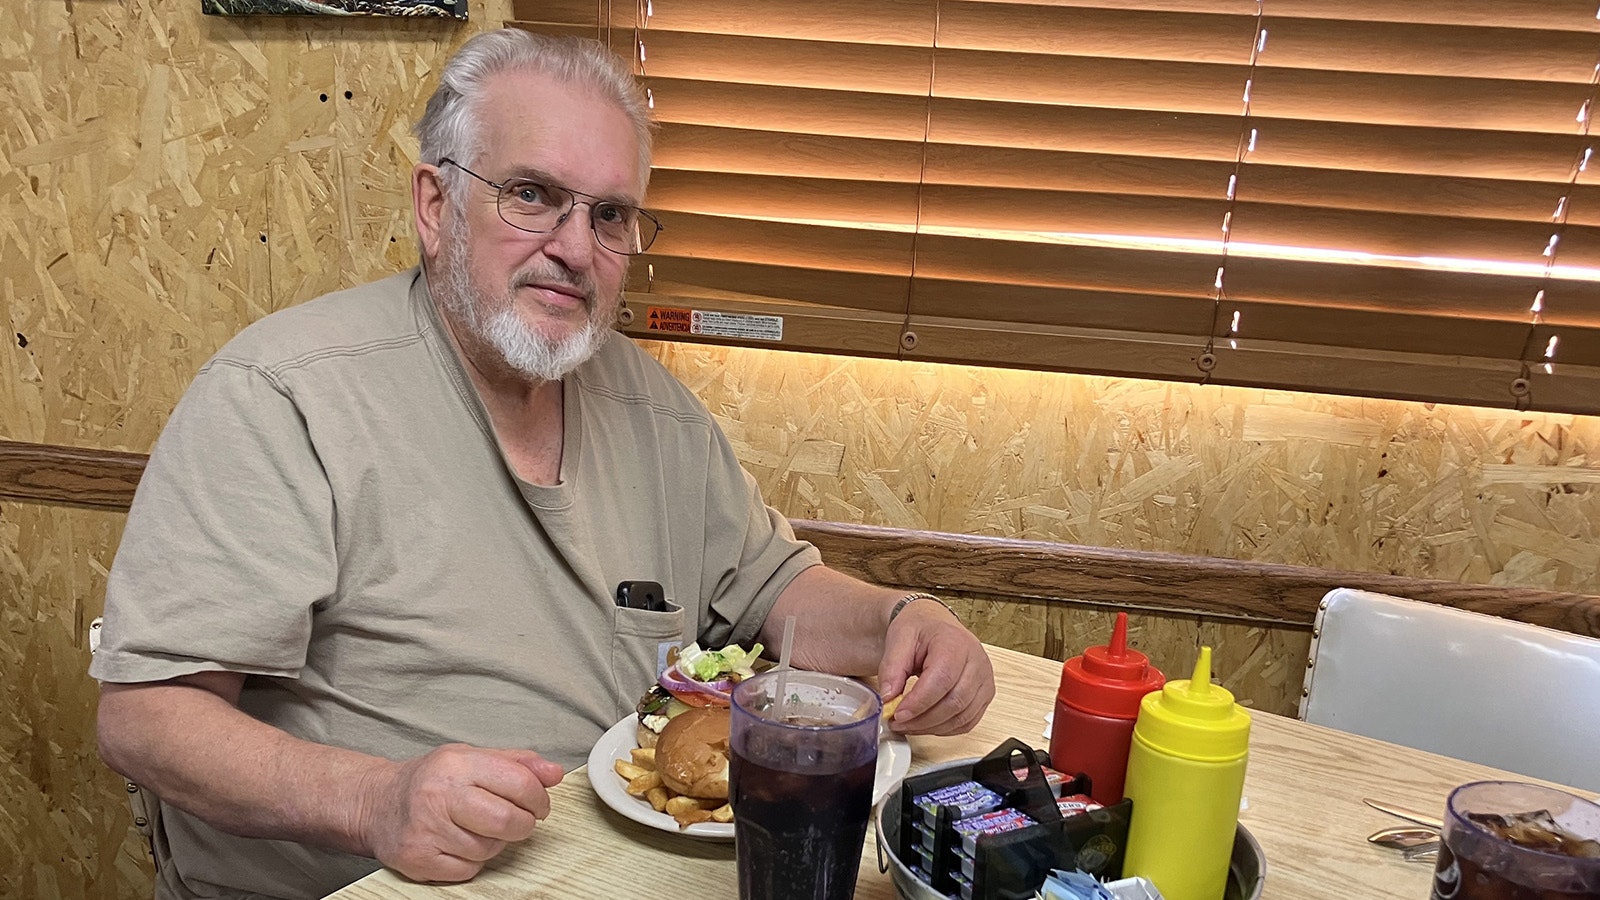 Don Clark of Salt Lake City, Utah, was just traveling through the area and learned about G-Ma’s. He stopped in for a burger lunch.